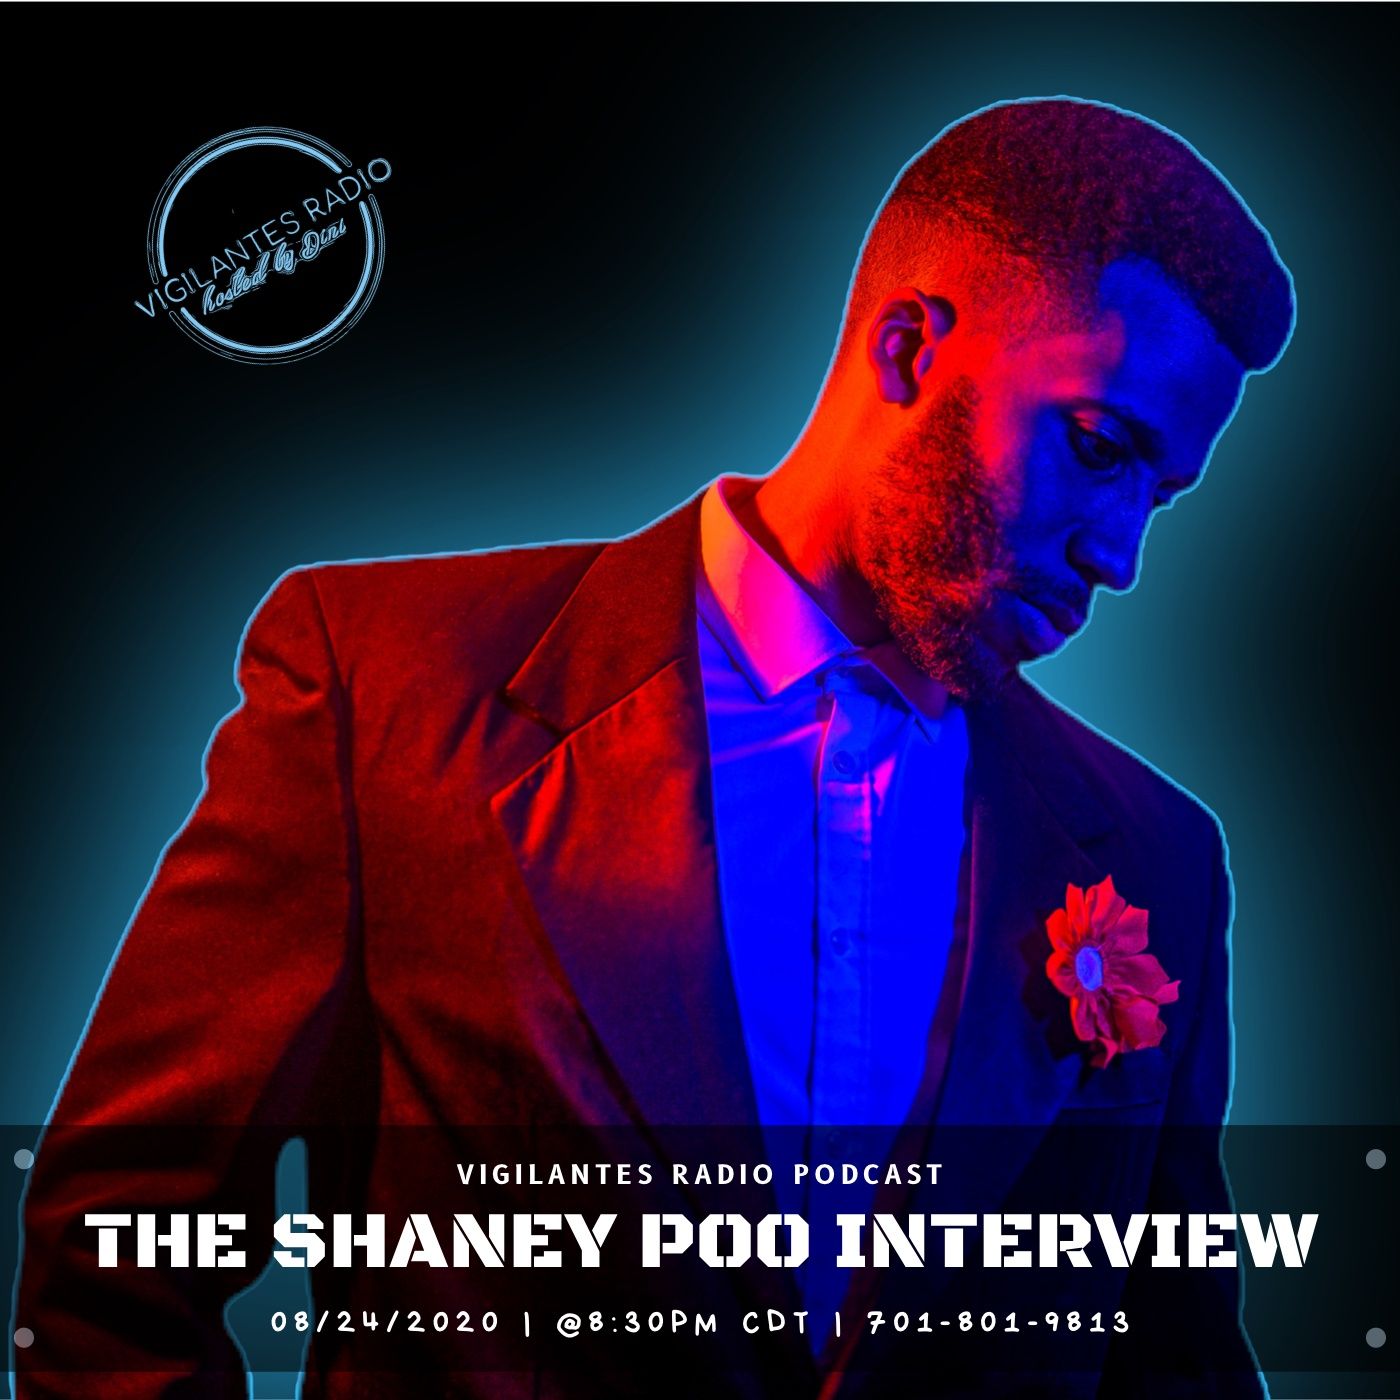 The Shaney Poo Interview. Image